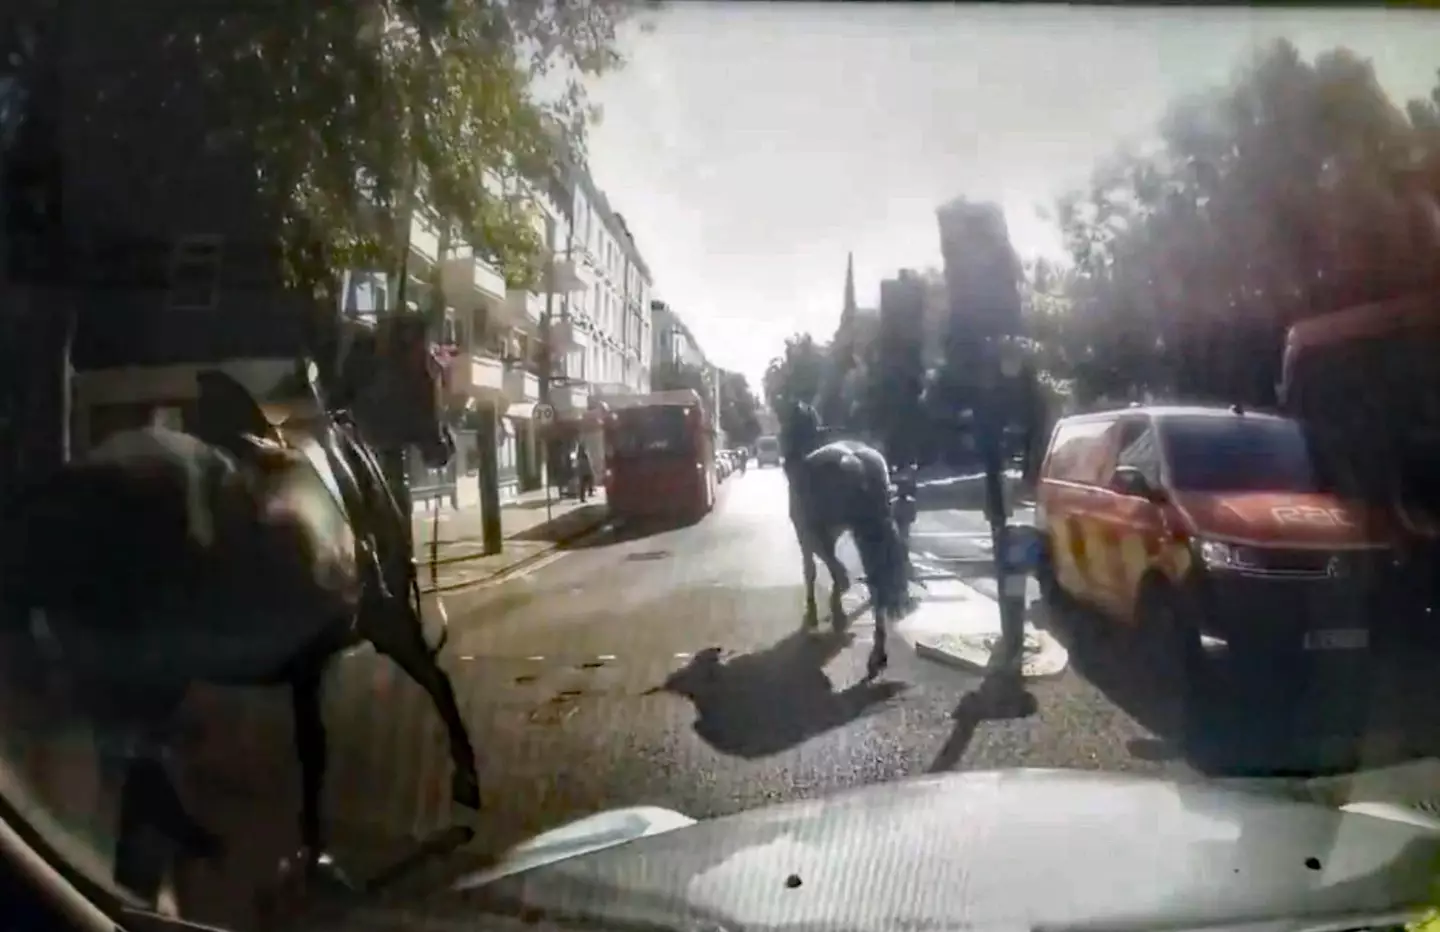 A black cab driver in London spotted the horses in the city centre. (PA/X/@Davenoisome)